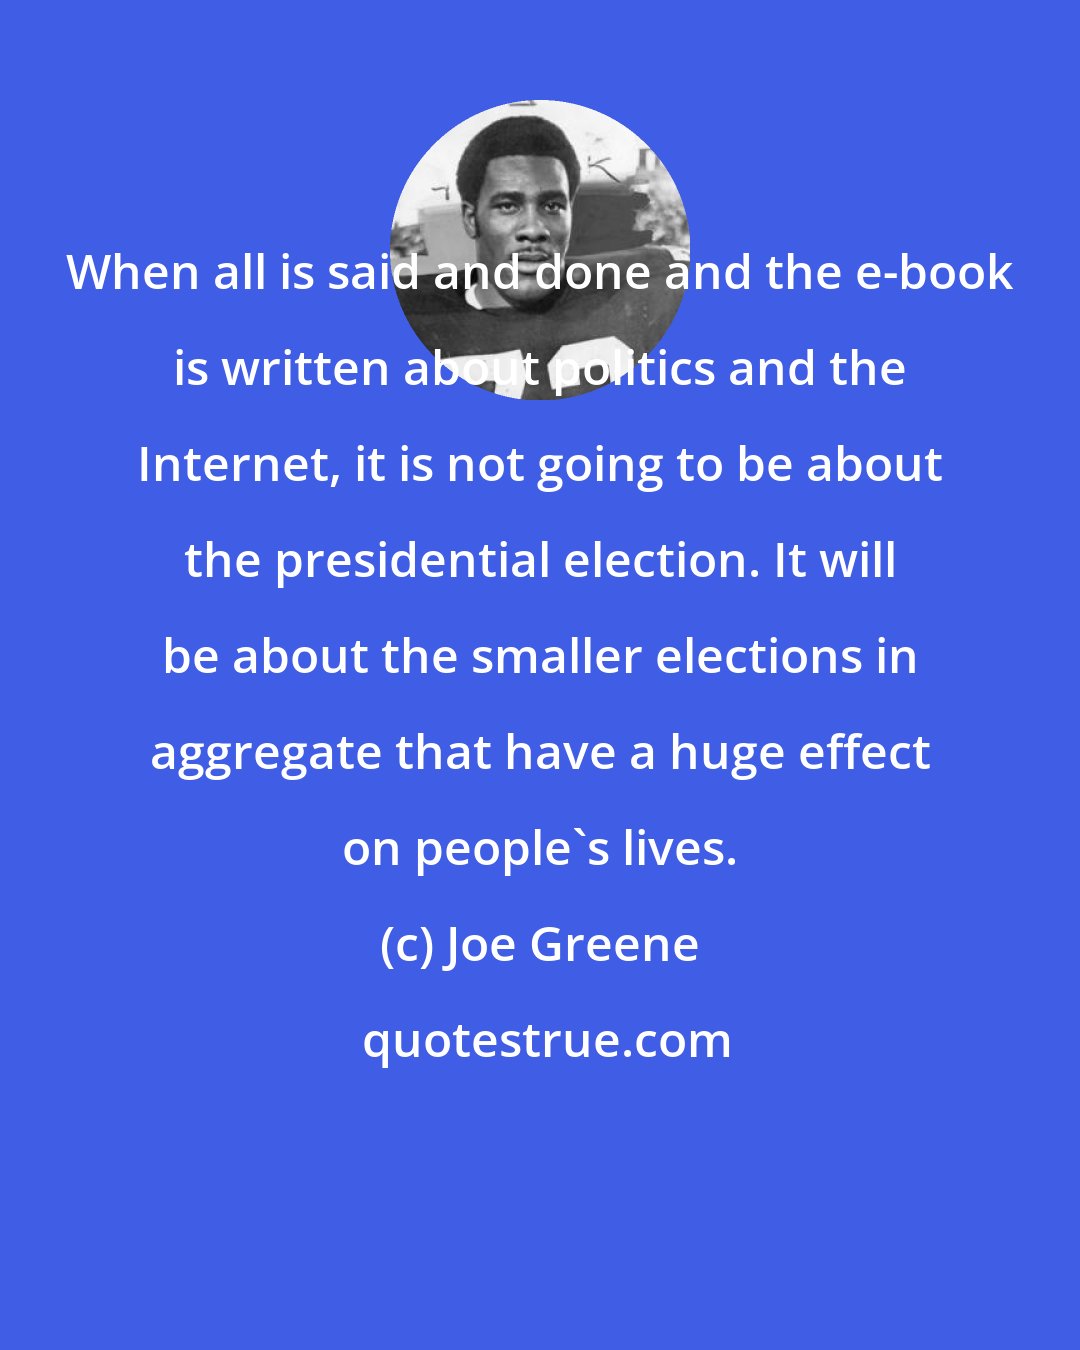 Joe Greene: When all is said and done and the e-book is written about politics and the Internet, it is not going to be about the presidential election. It will be about the smaller elections in aggregate that have a huge effect on people's lives.